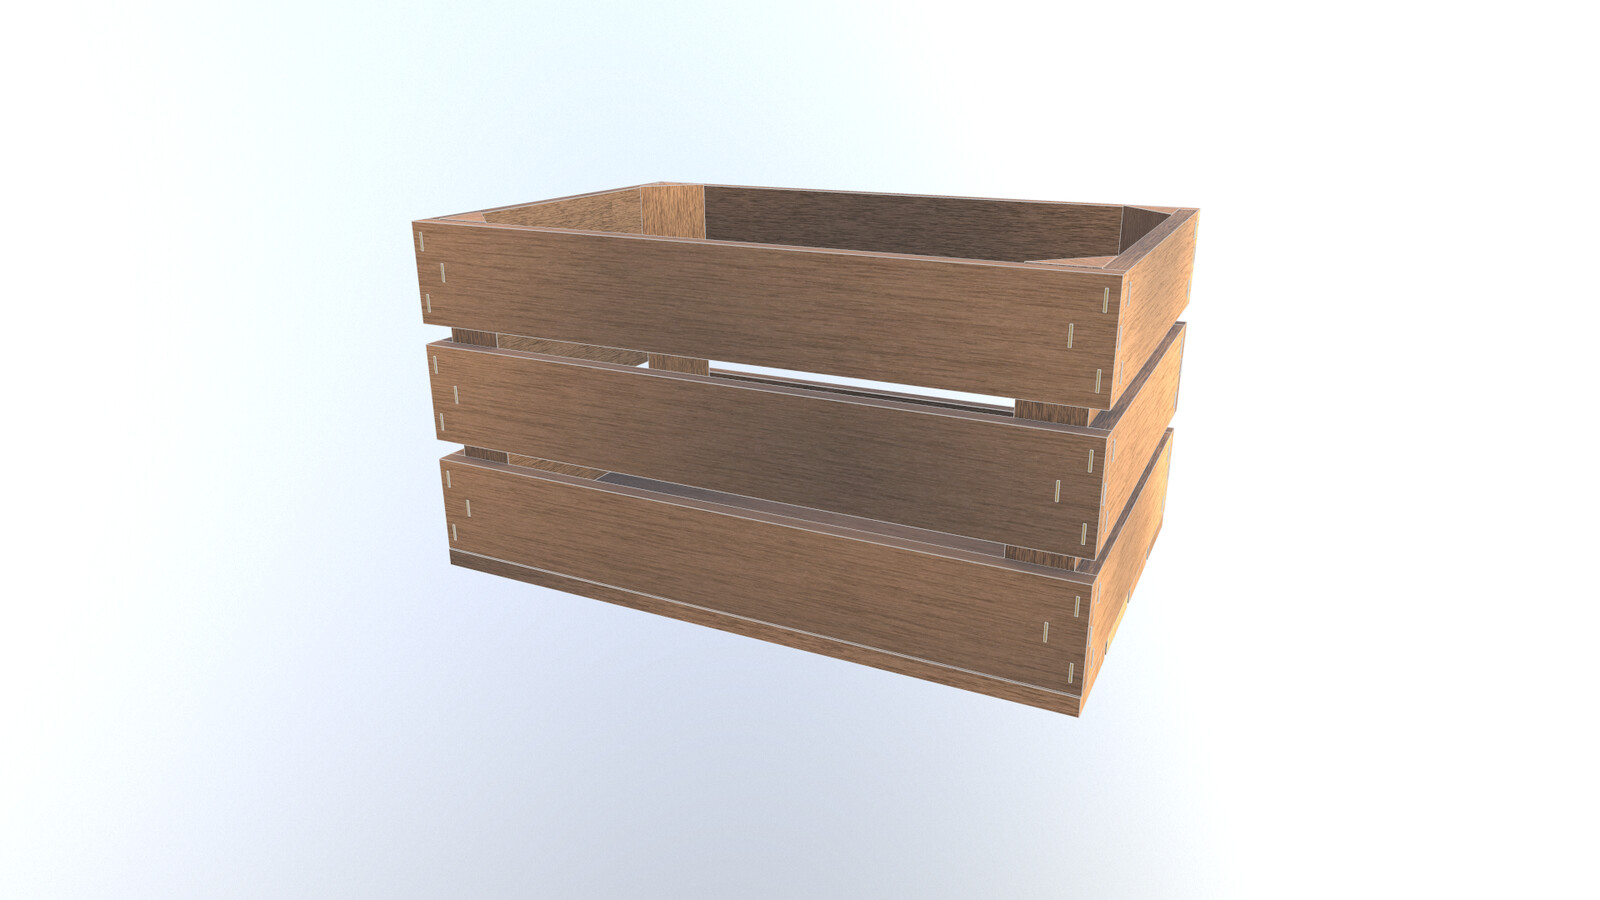 Wooden Crate wireframe 1